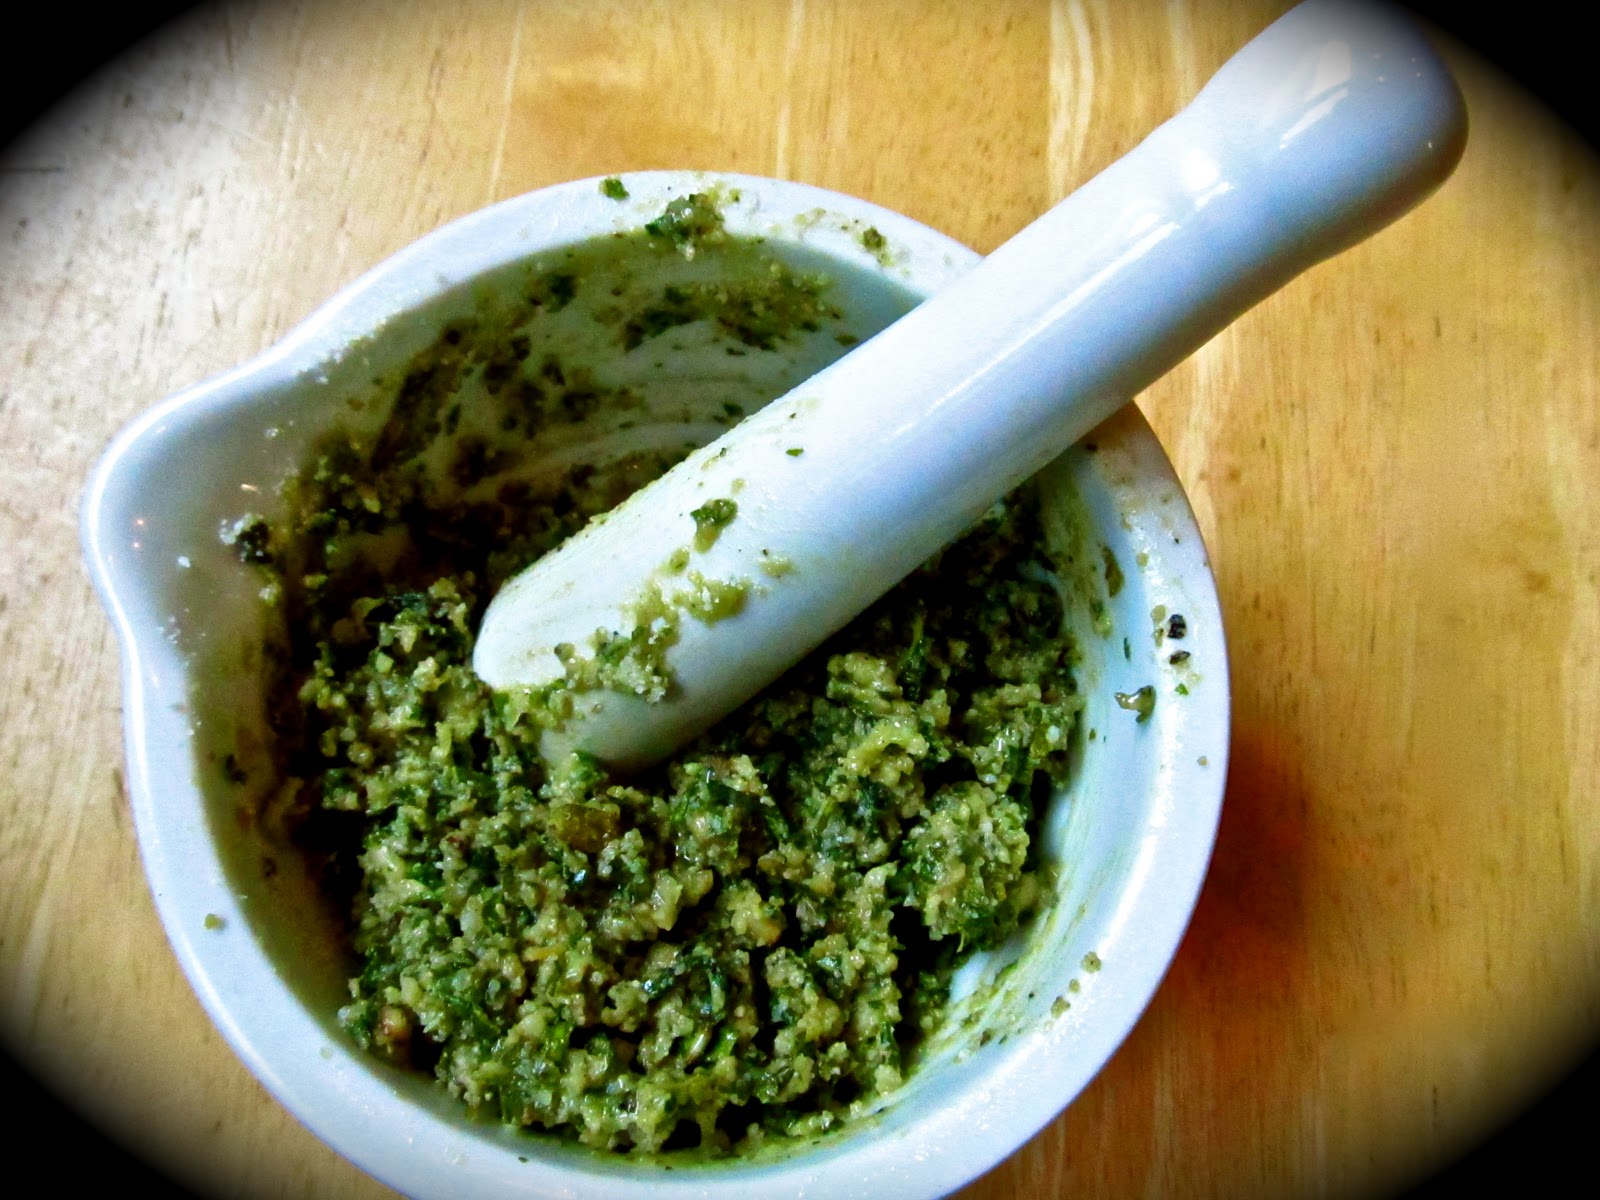 Best Mortar And Pestle For Making Pesto